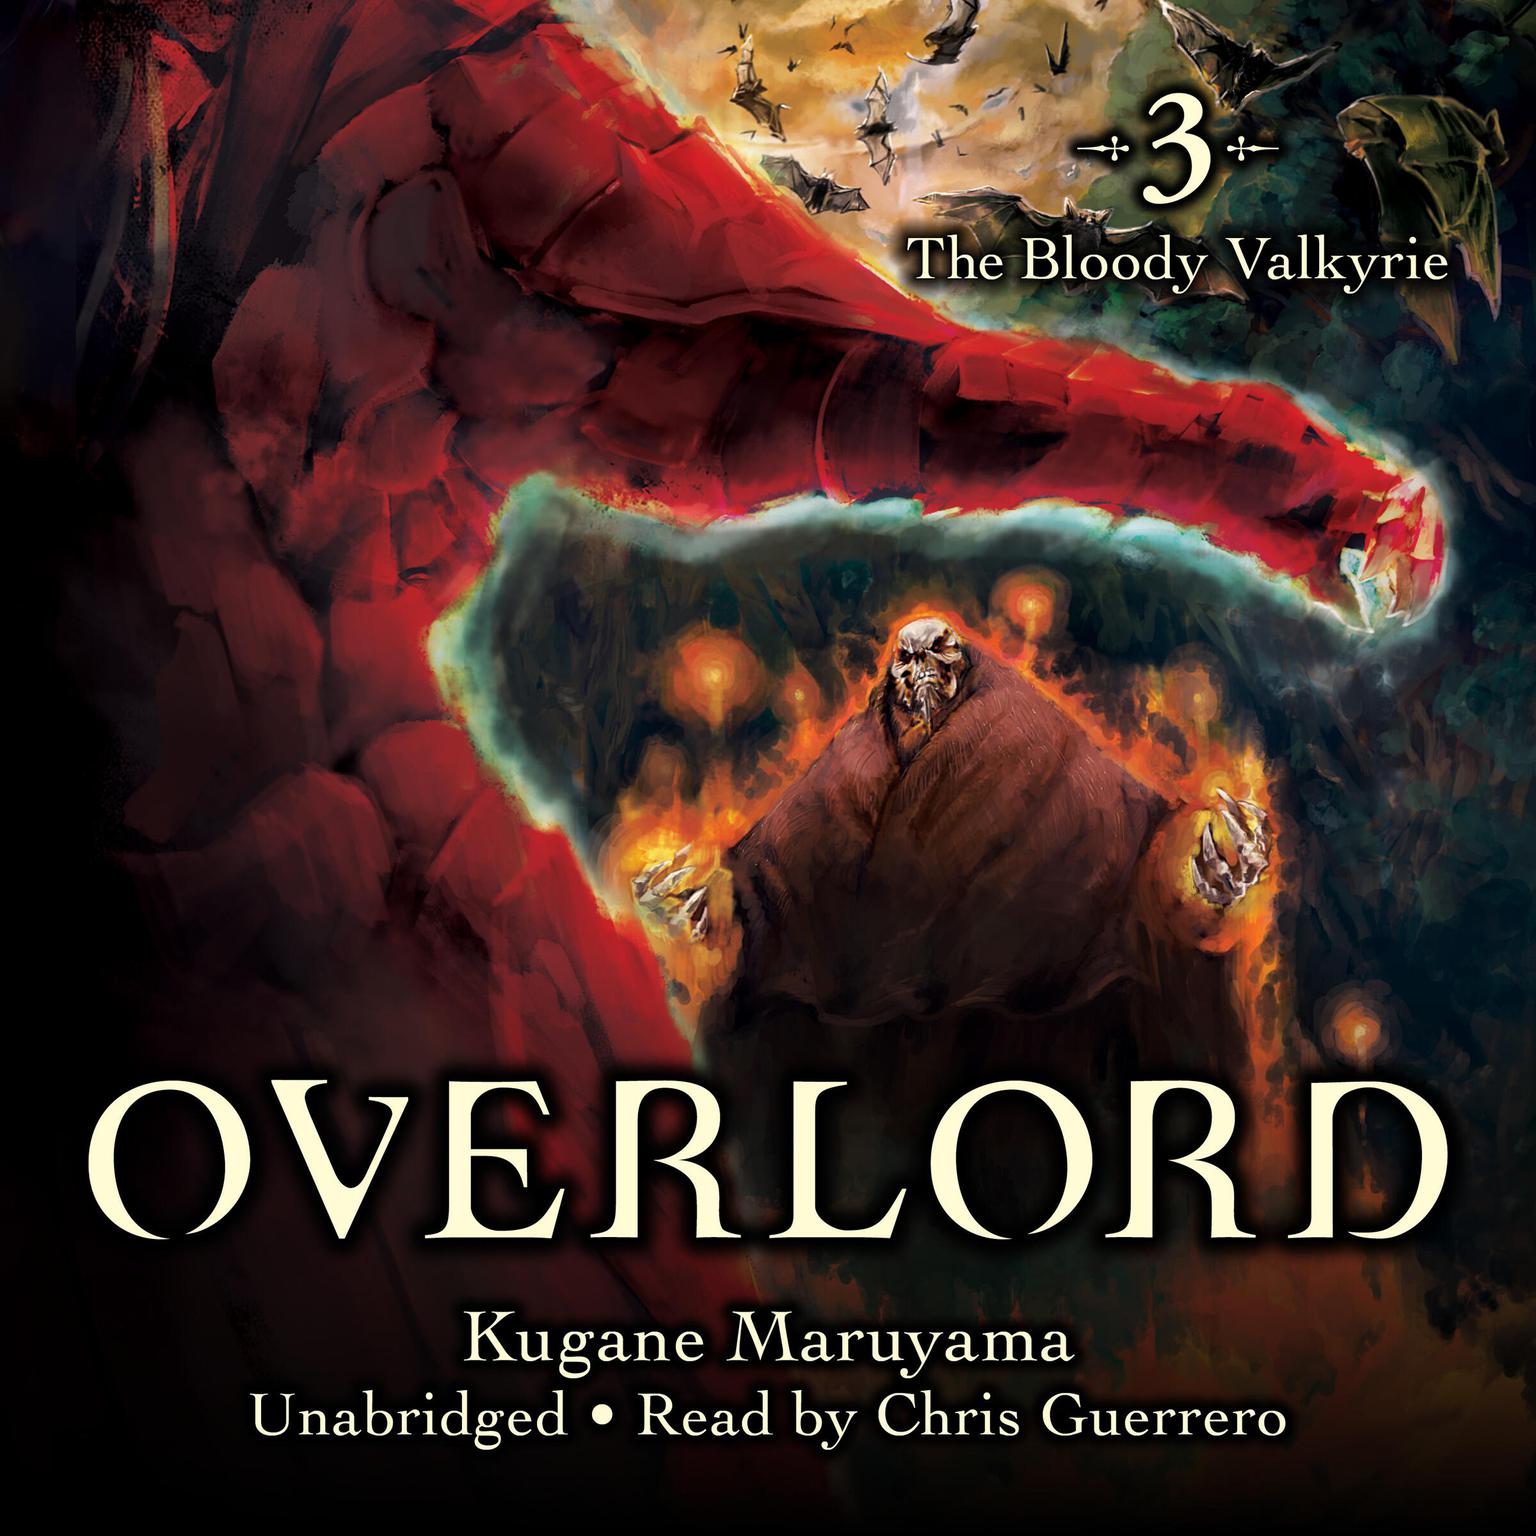 Overlord, Vol. 3: The Bloody Valkyrie Audiobook, by Kugane Maruyama